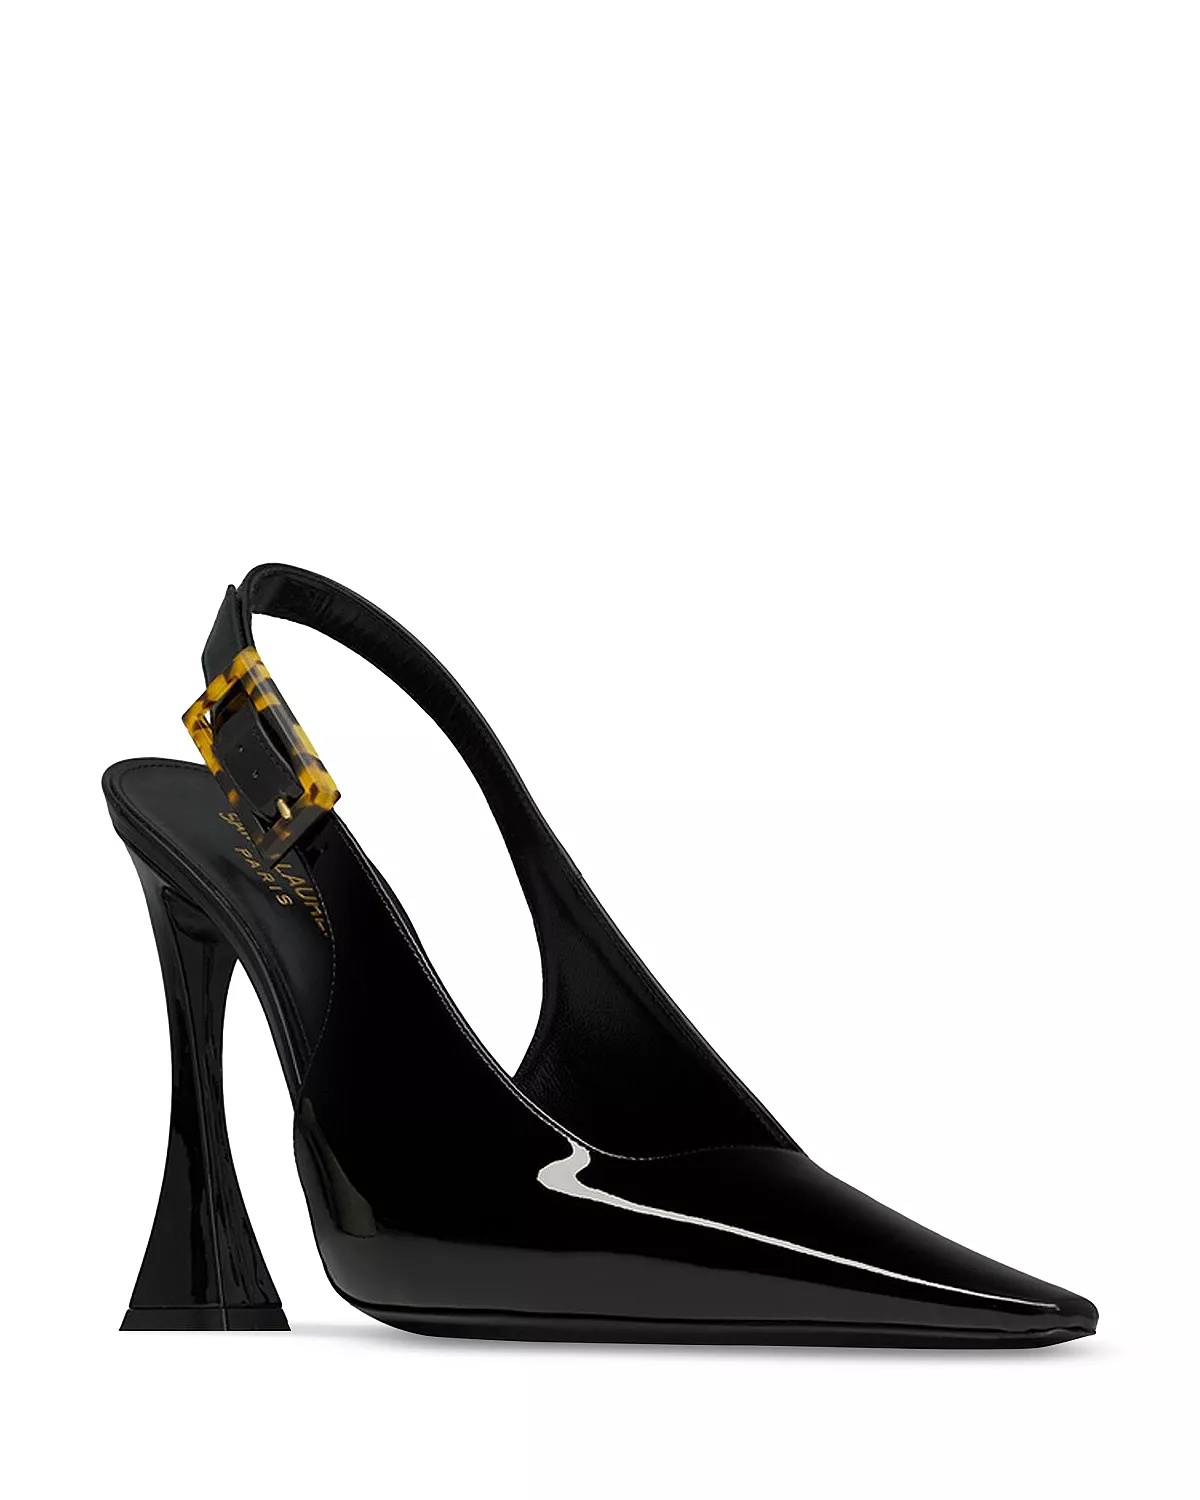 Dune Slingback Pumps in Patent Leather - 1